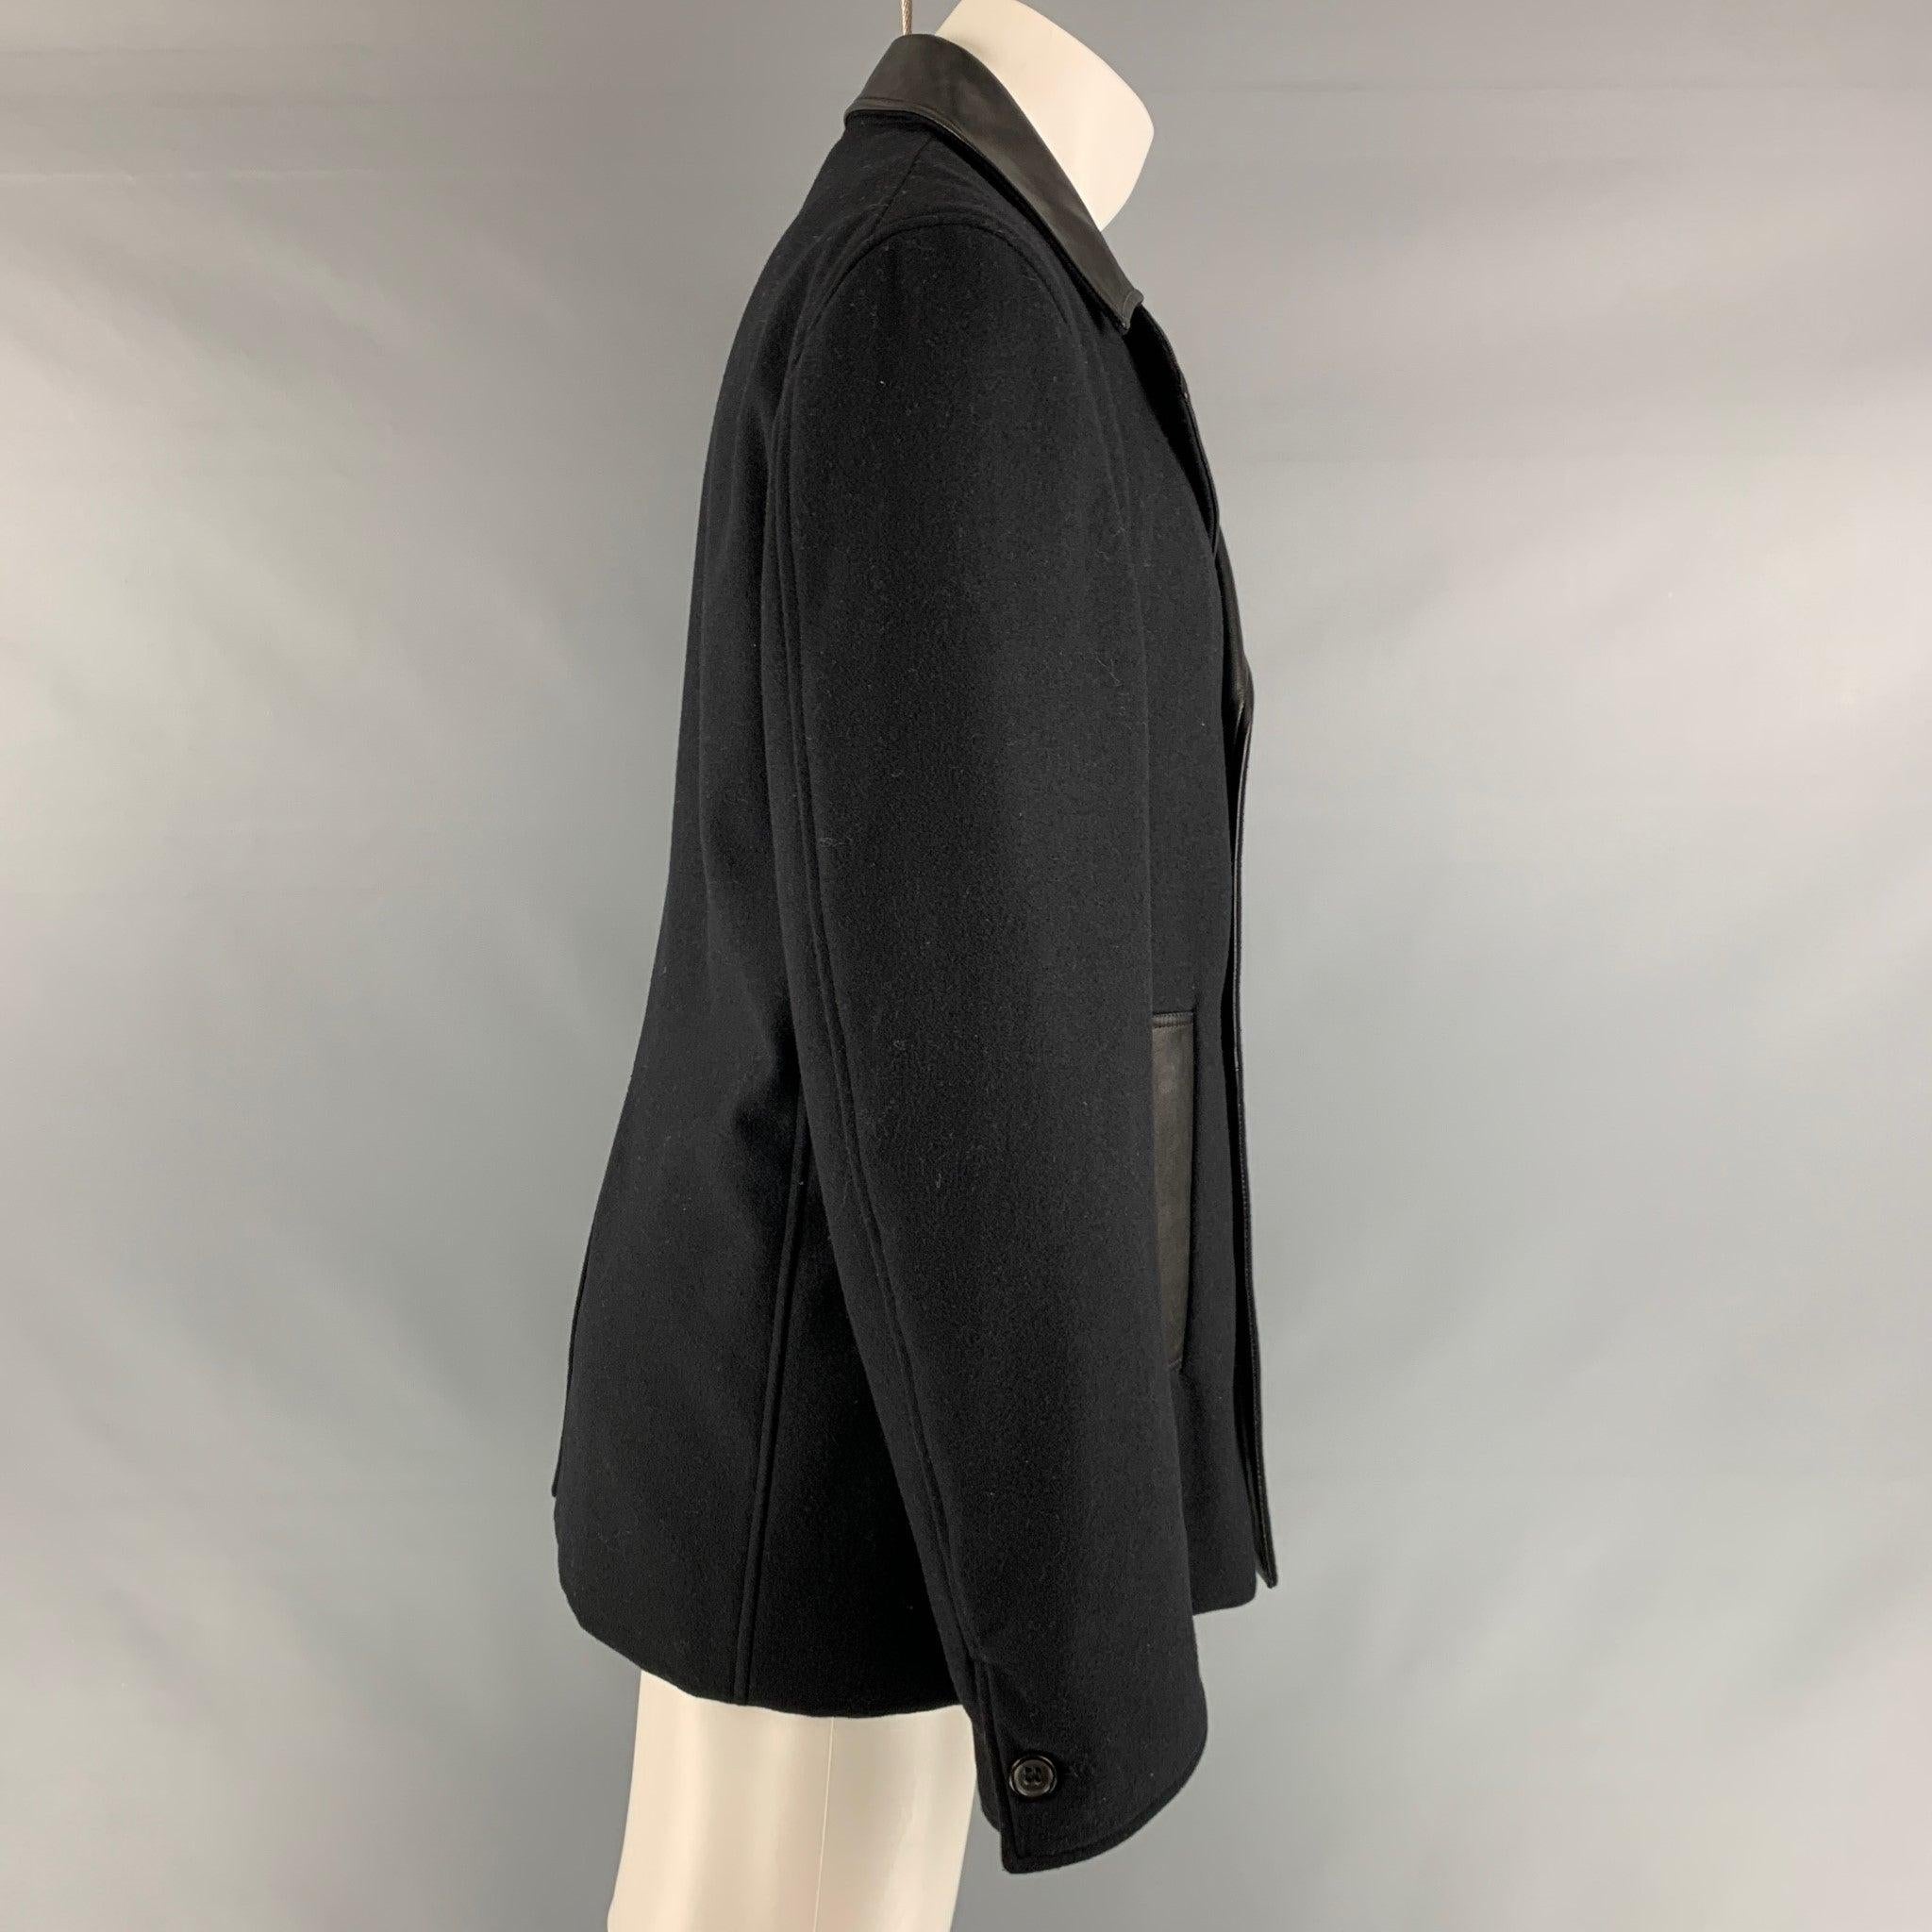 JIL SANDER coat comes in a black wool woven material with a full liner featuring a, black leather details, notch lapel, welt pockets, double breasted, and a button closure.Very Good Pre-Owned Condition. Minor signs of wear. 

Marked:  40